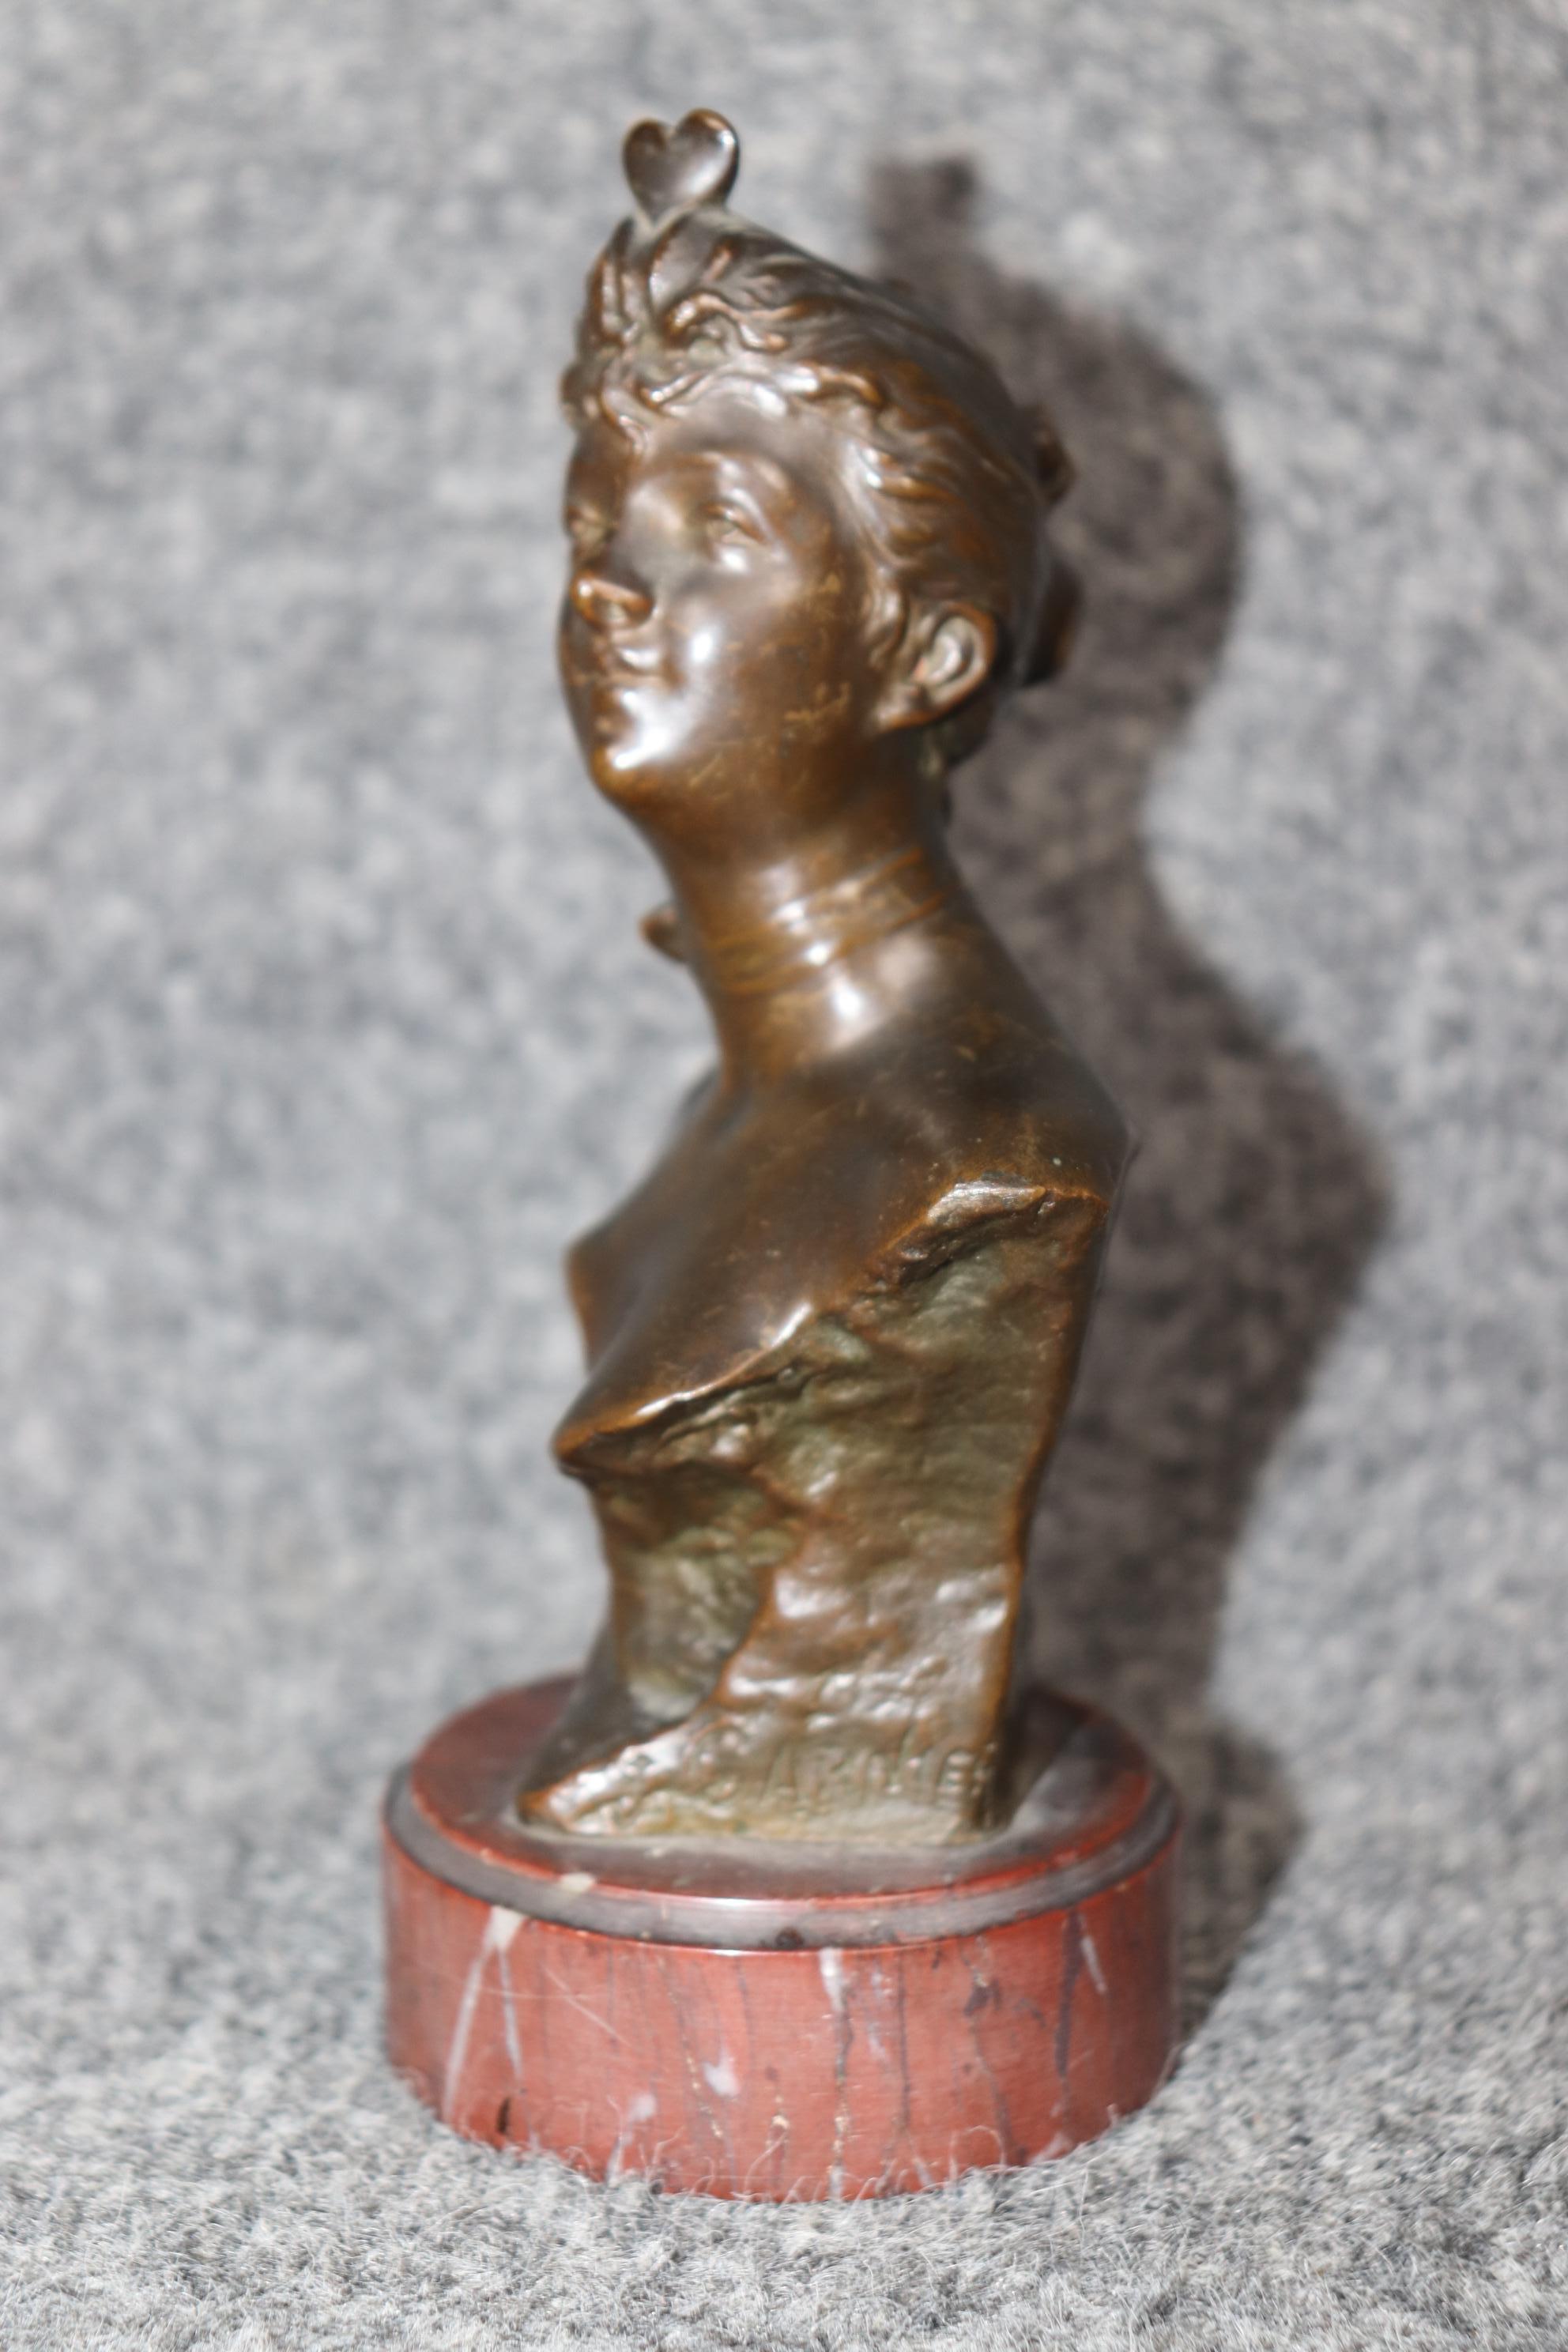 Dimensions - H: 6 1/2in W: 3 1/4in D: 2 3/4in 

This French Nouveau Style Bronze Bust On Marble Base of Lady Signed J. Garnier is truly a lovely example of french decorative arts. If you look at the photos provided you will see the quality within